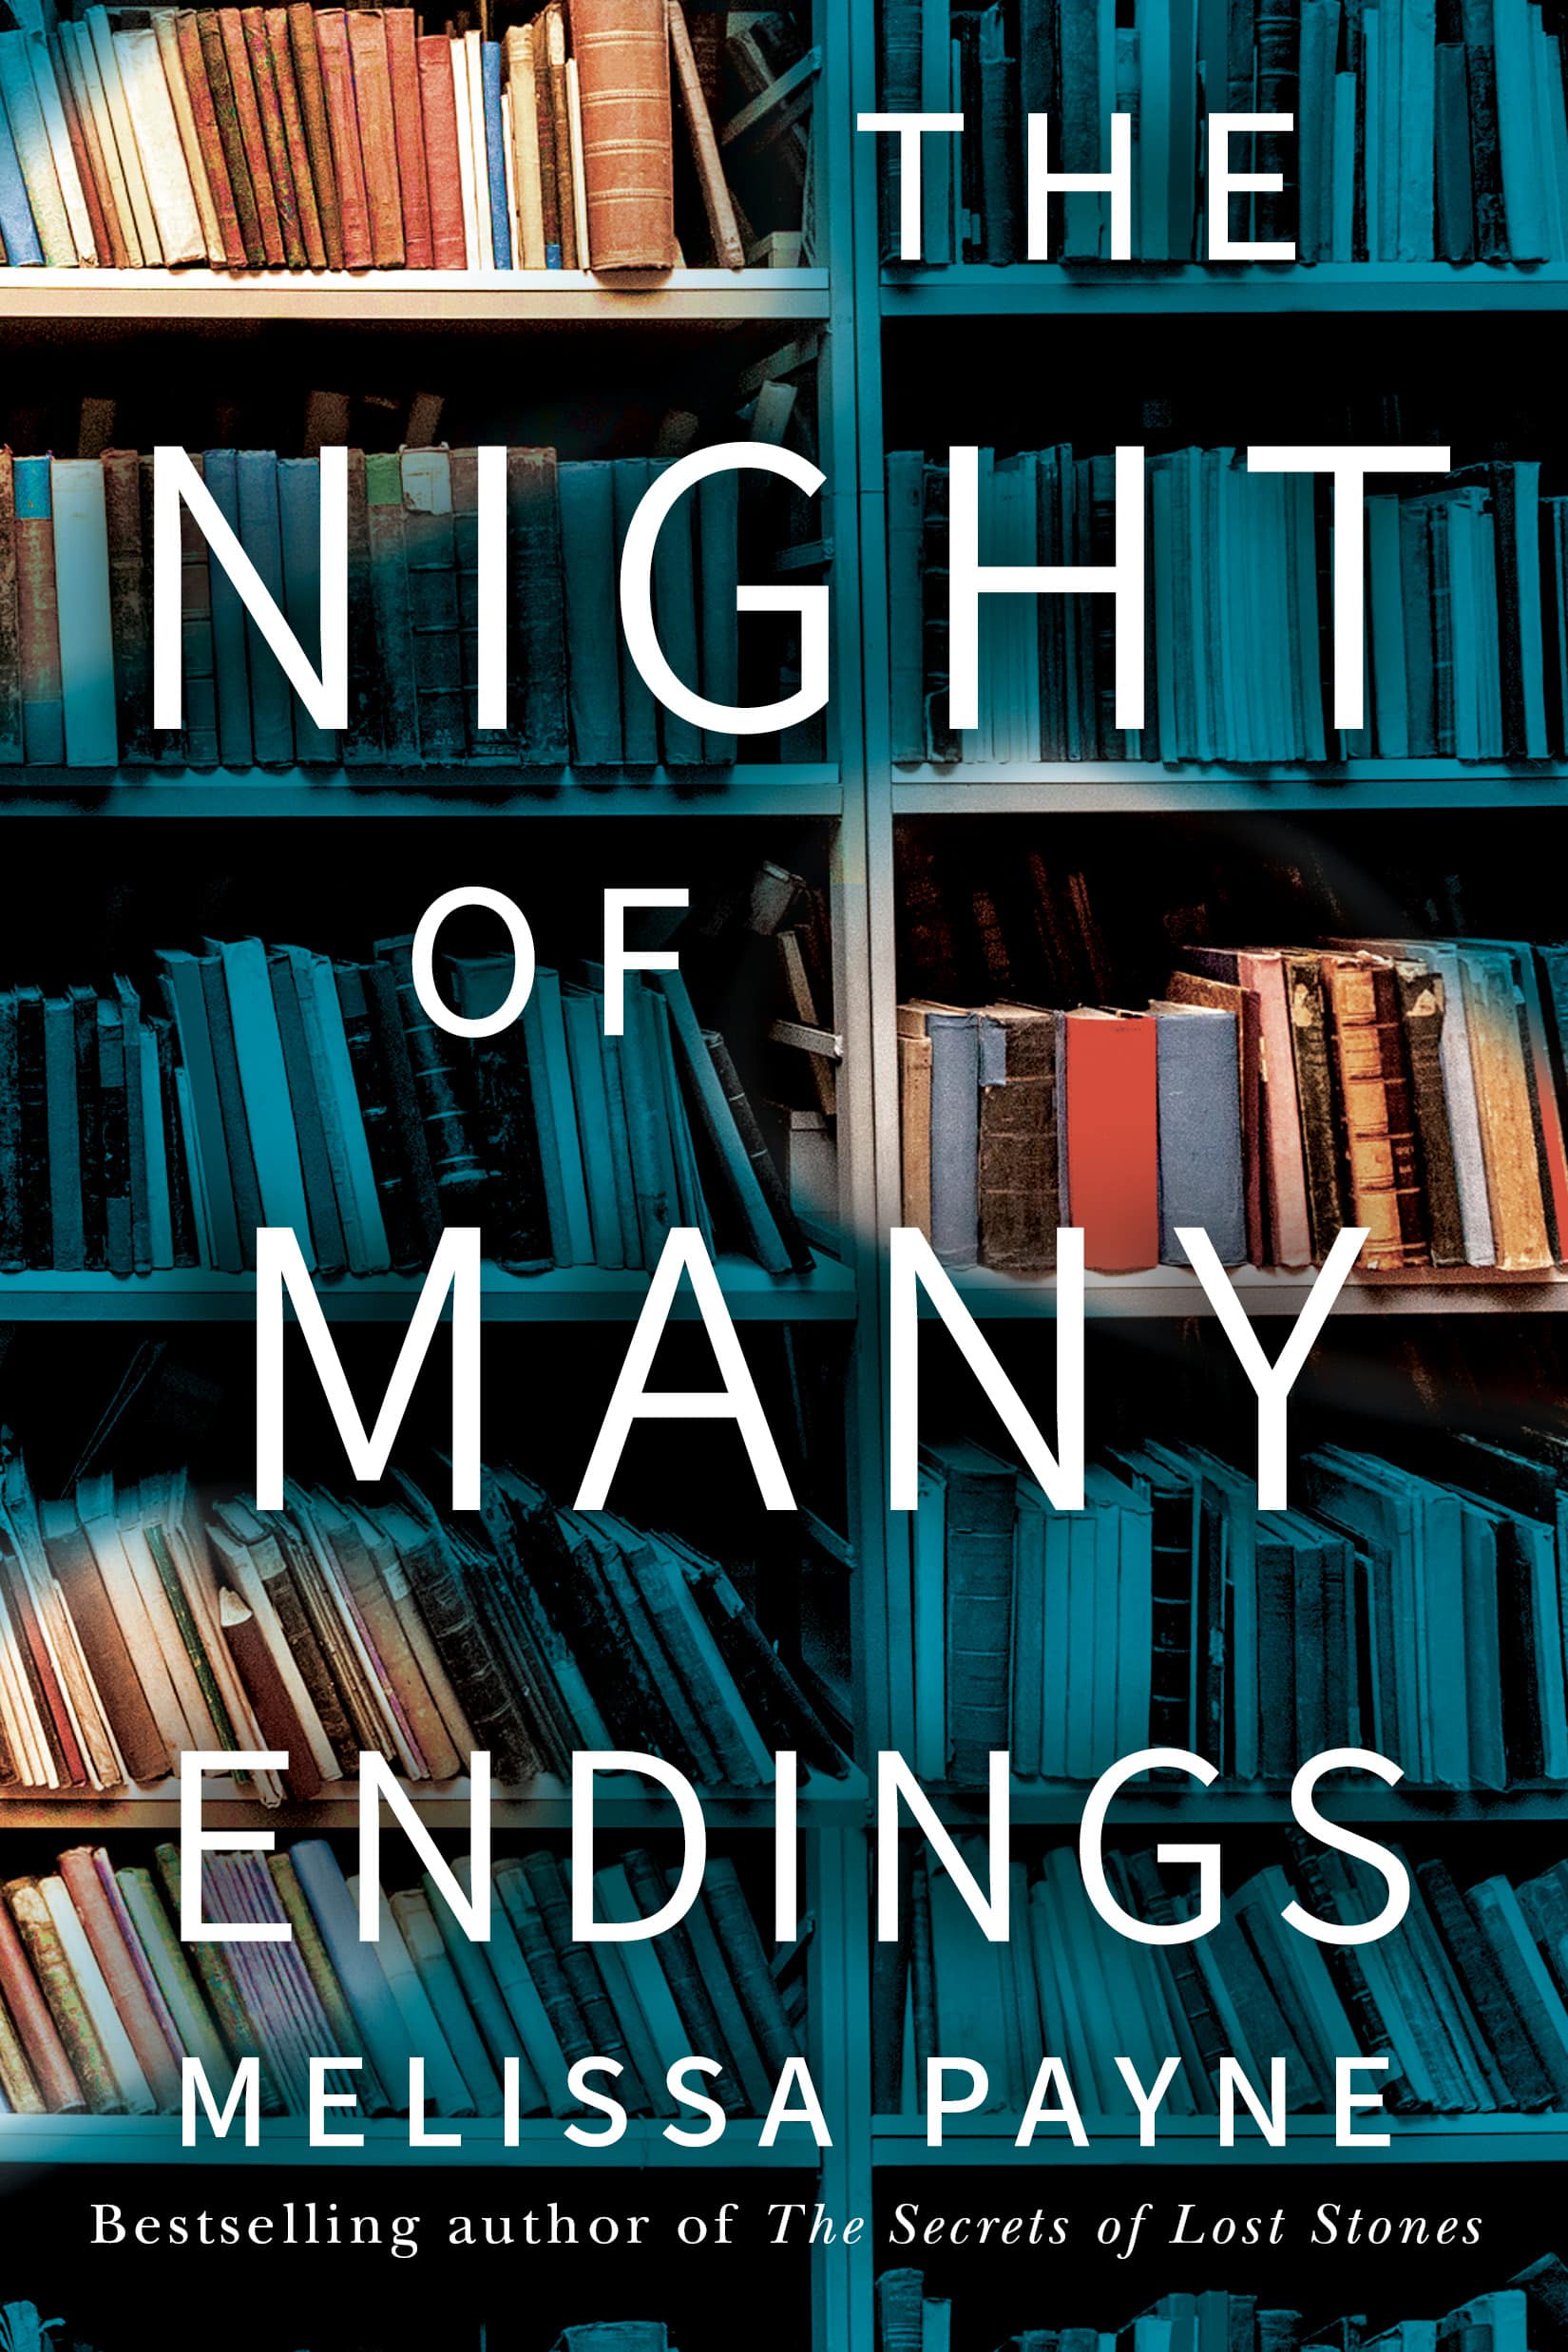 Payne, The Night of Many Endings